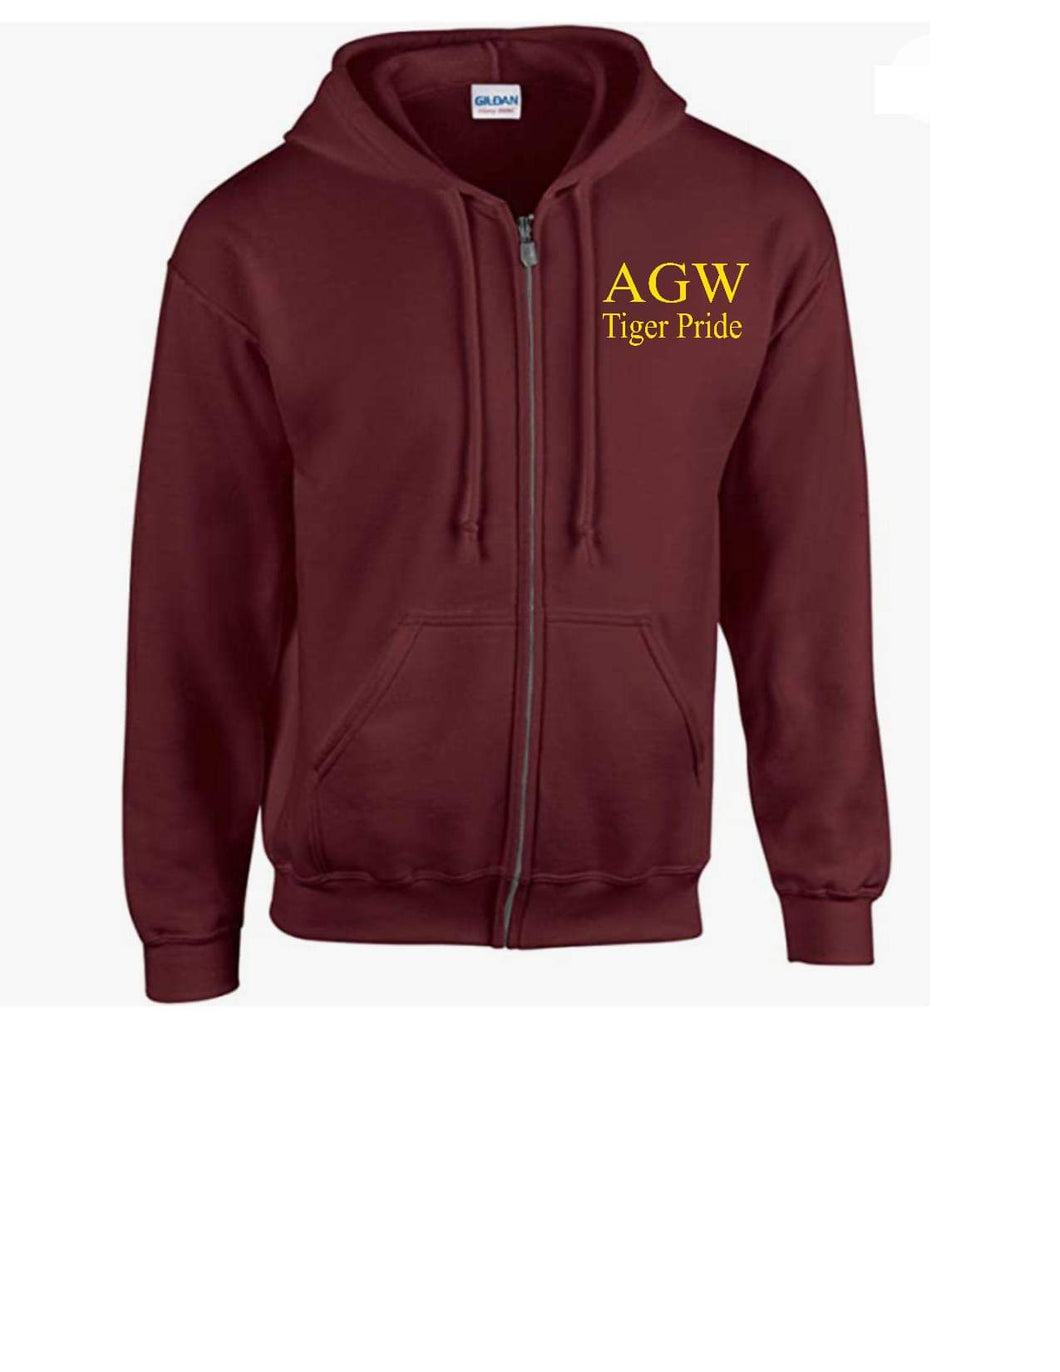 Maroon Zippered Hoodie with AGWTP embroidery in yellow gold thread